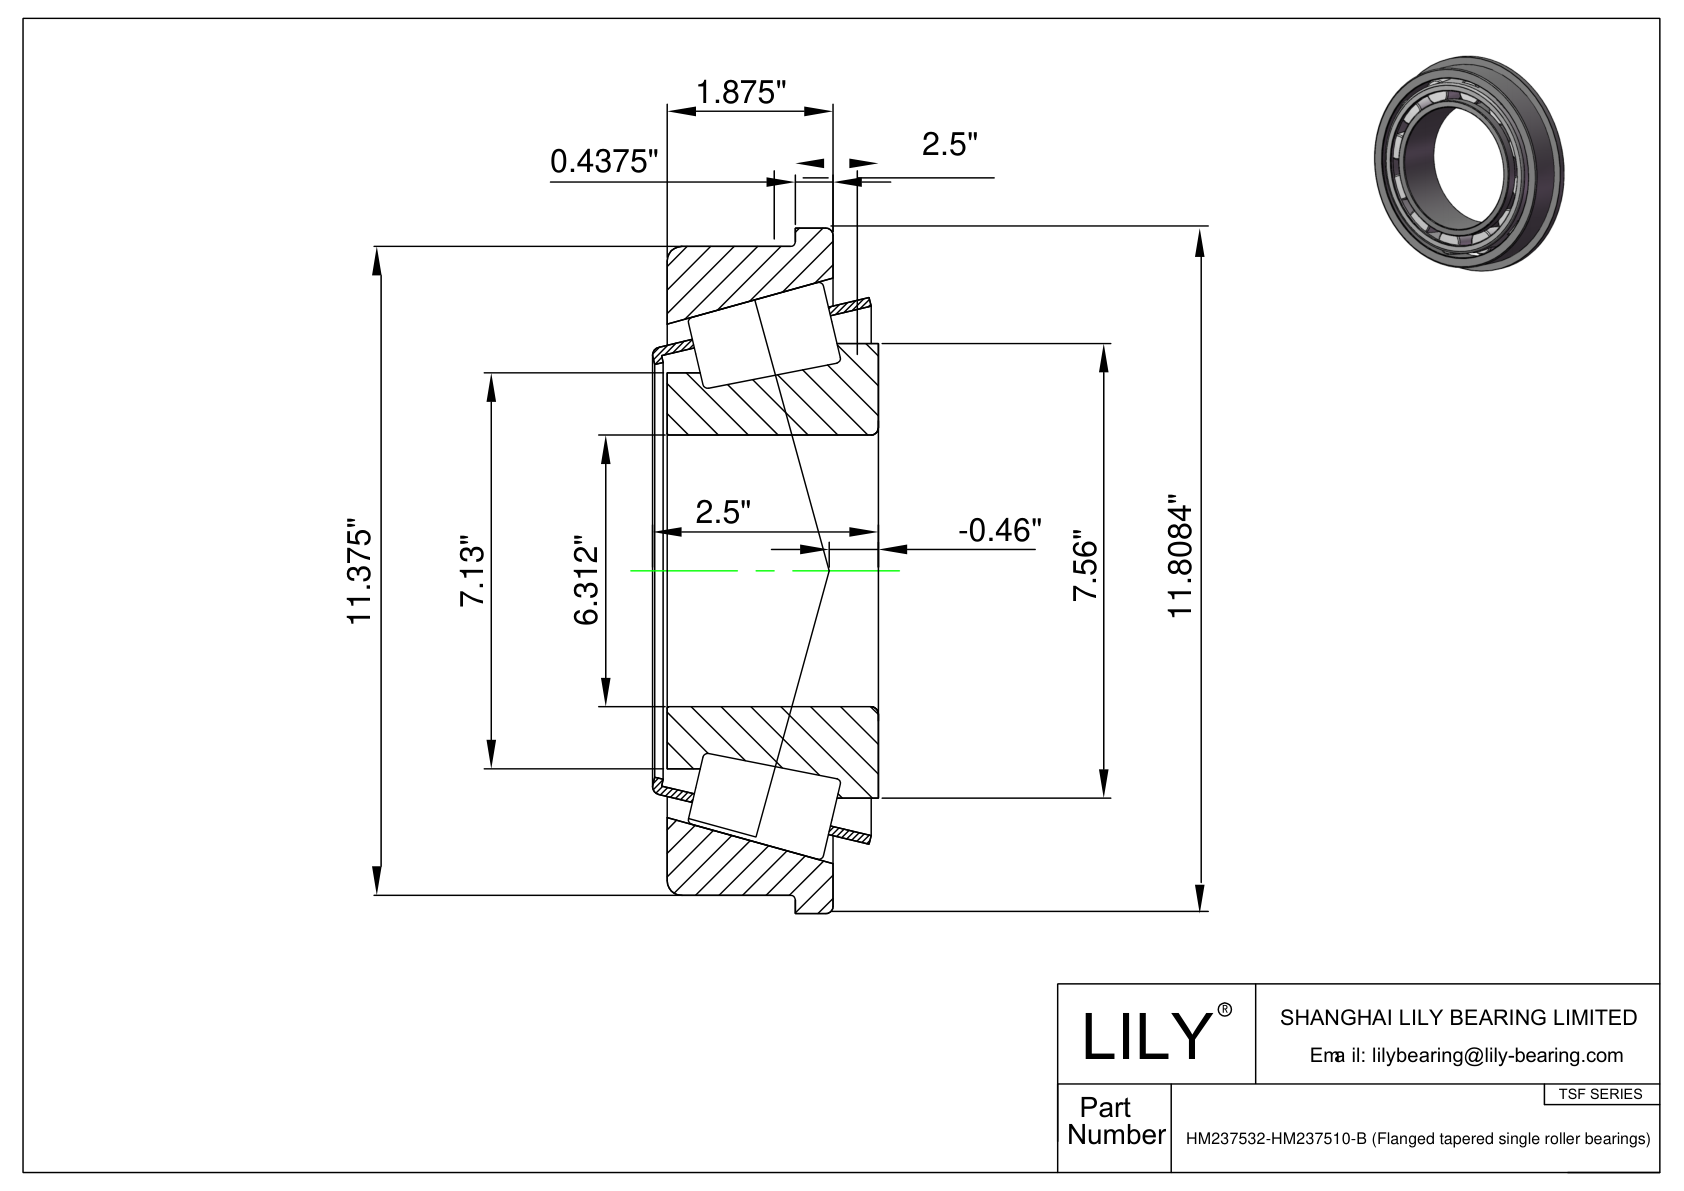 HM237532-HM237510-B TSF (Tapered Single Roller Bearings with Flange) (Imperial) cad drawing